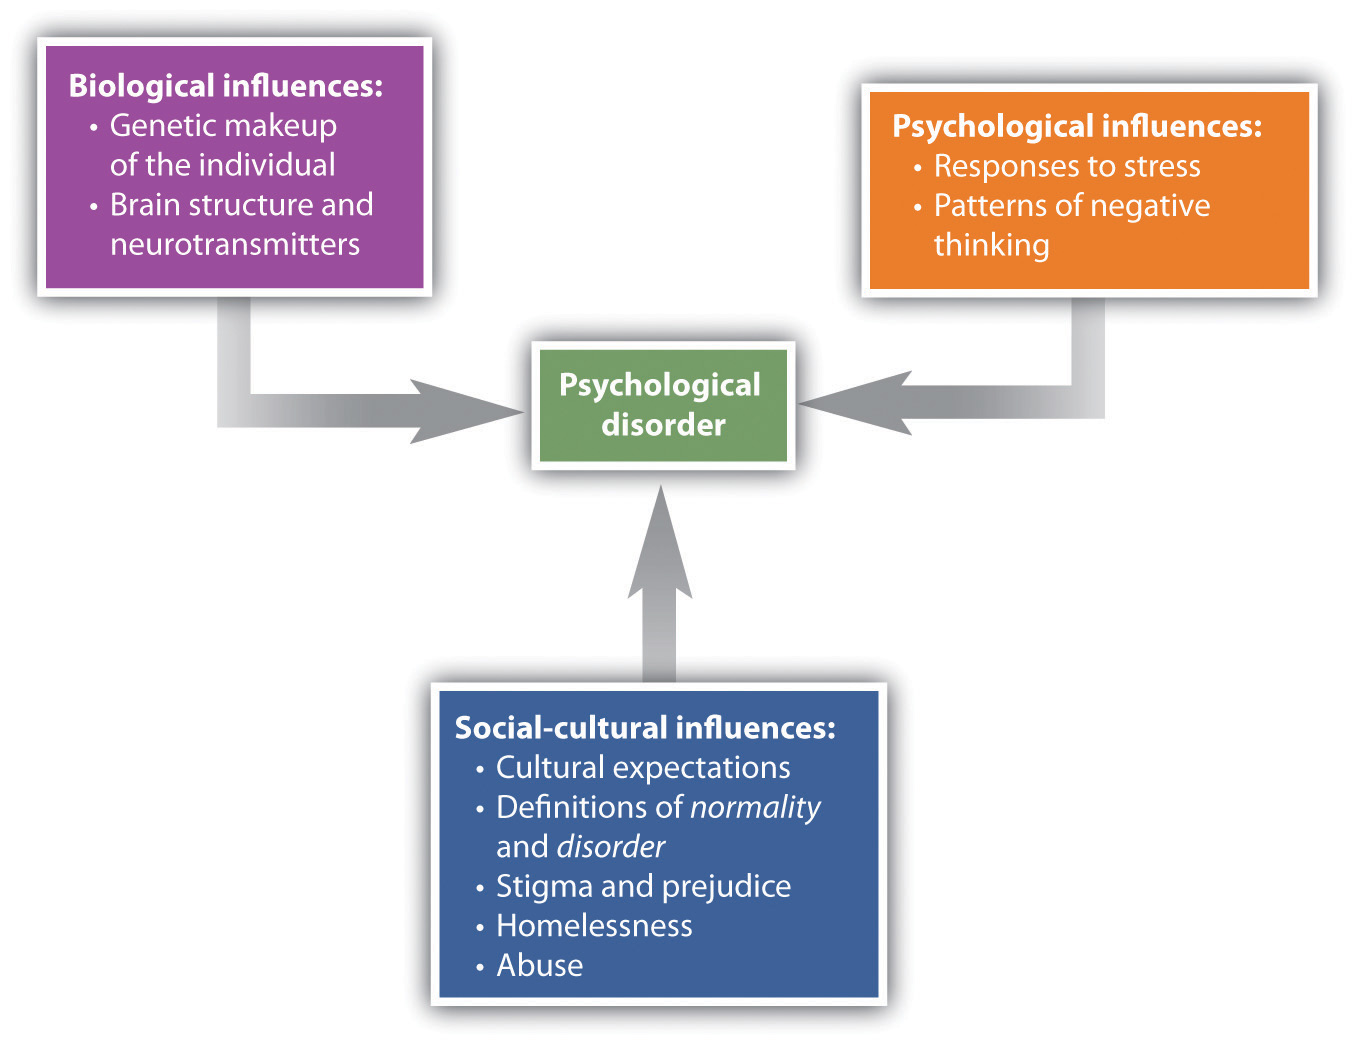 This chart has four textboxes. A box labeled "Psychological disorder” is at the centre, and all other boxes point toward it. An arrow points to the centre from a box labeled “Biological influences” containing “genetic makeup of the individual; brain structure and neurotransmitters.” Another arrow points to the centre from a box labeled “Psychological influences” containing “responses to stress; patterns of negative thinking.” A third arrow points to the centre from a box labeled “Social-cultural influences” containing “cultural expectations; definitions of normality and disorder; stigma and prejudice; homelessness; abuse.”